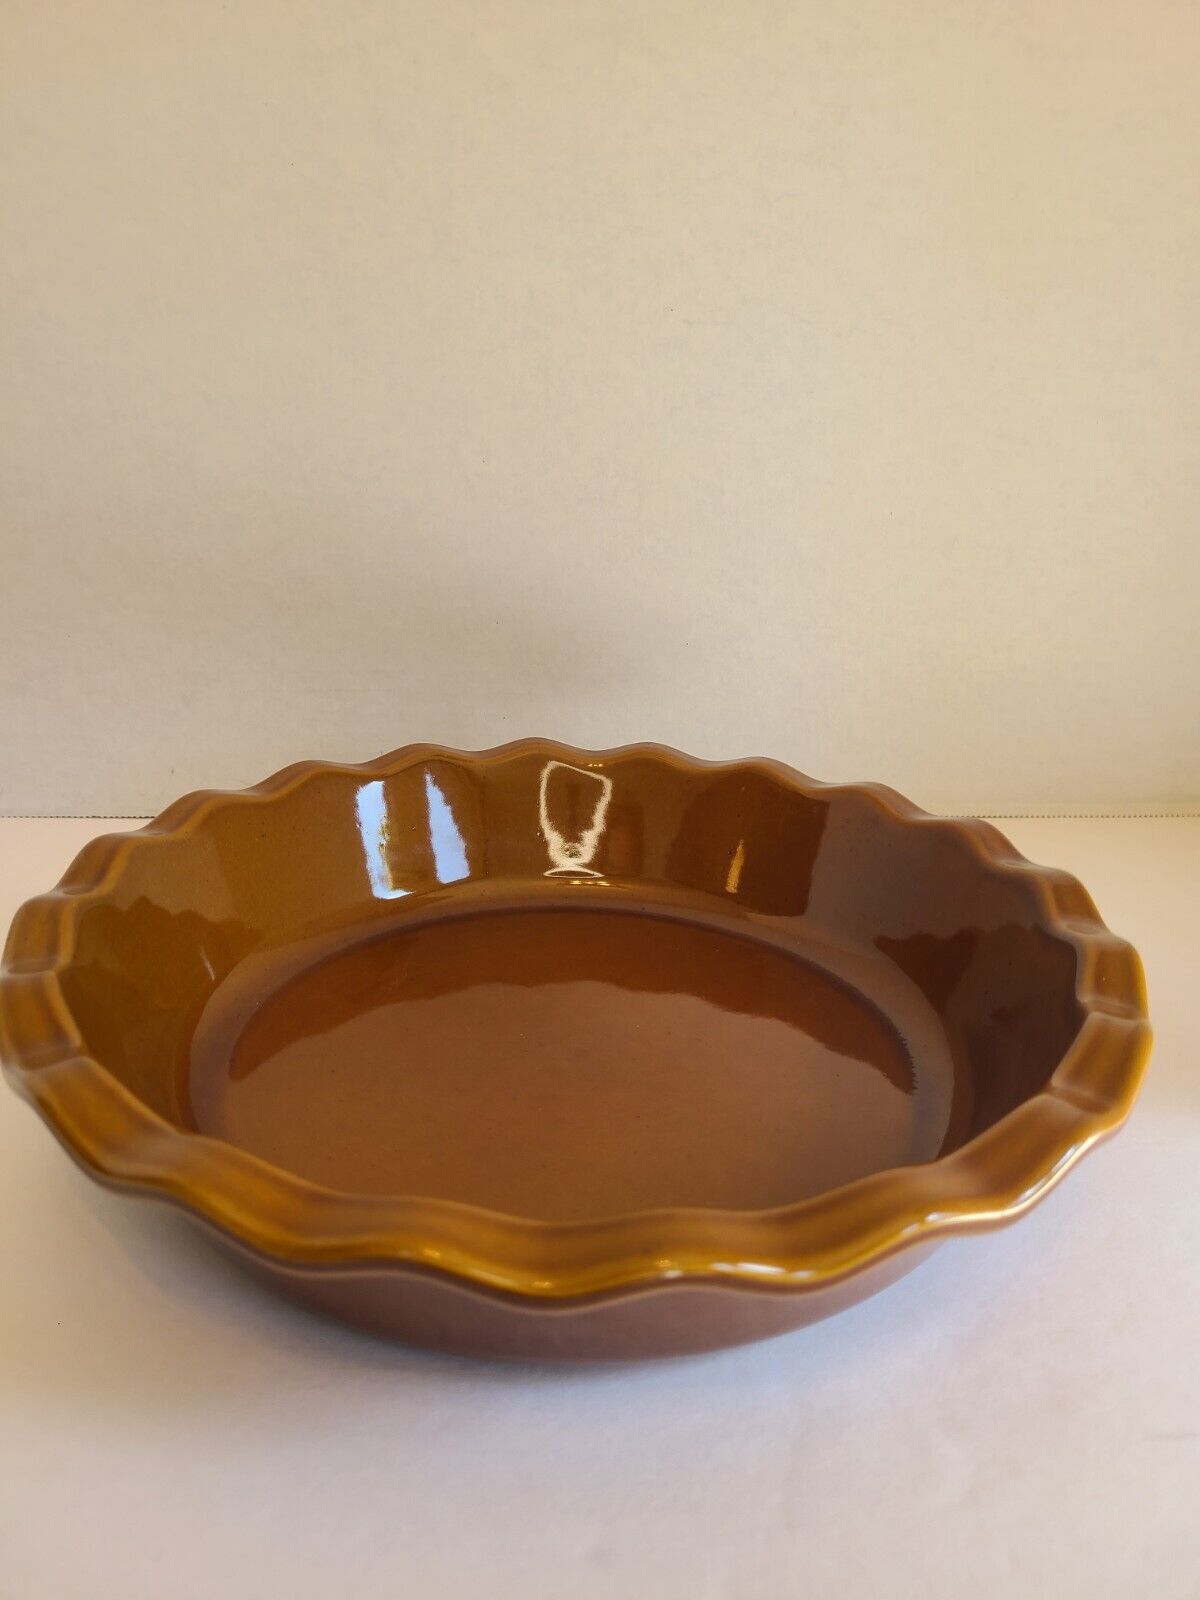 Emile Henry French Pie Dish 9 Inch Brown Vintage 